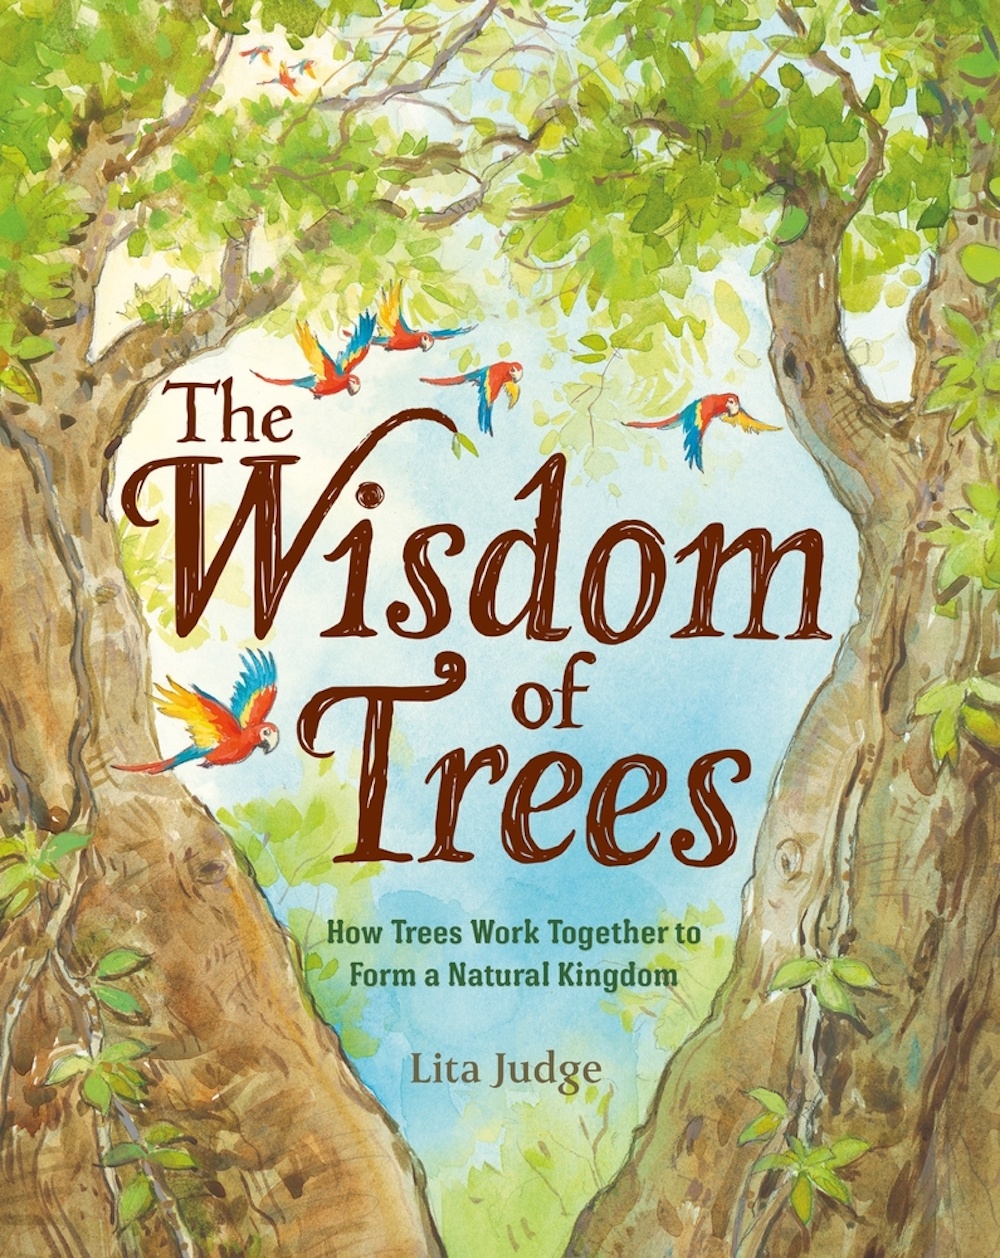 5 new books about spring for kids: The Wisdom of Trees by Lita Judge